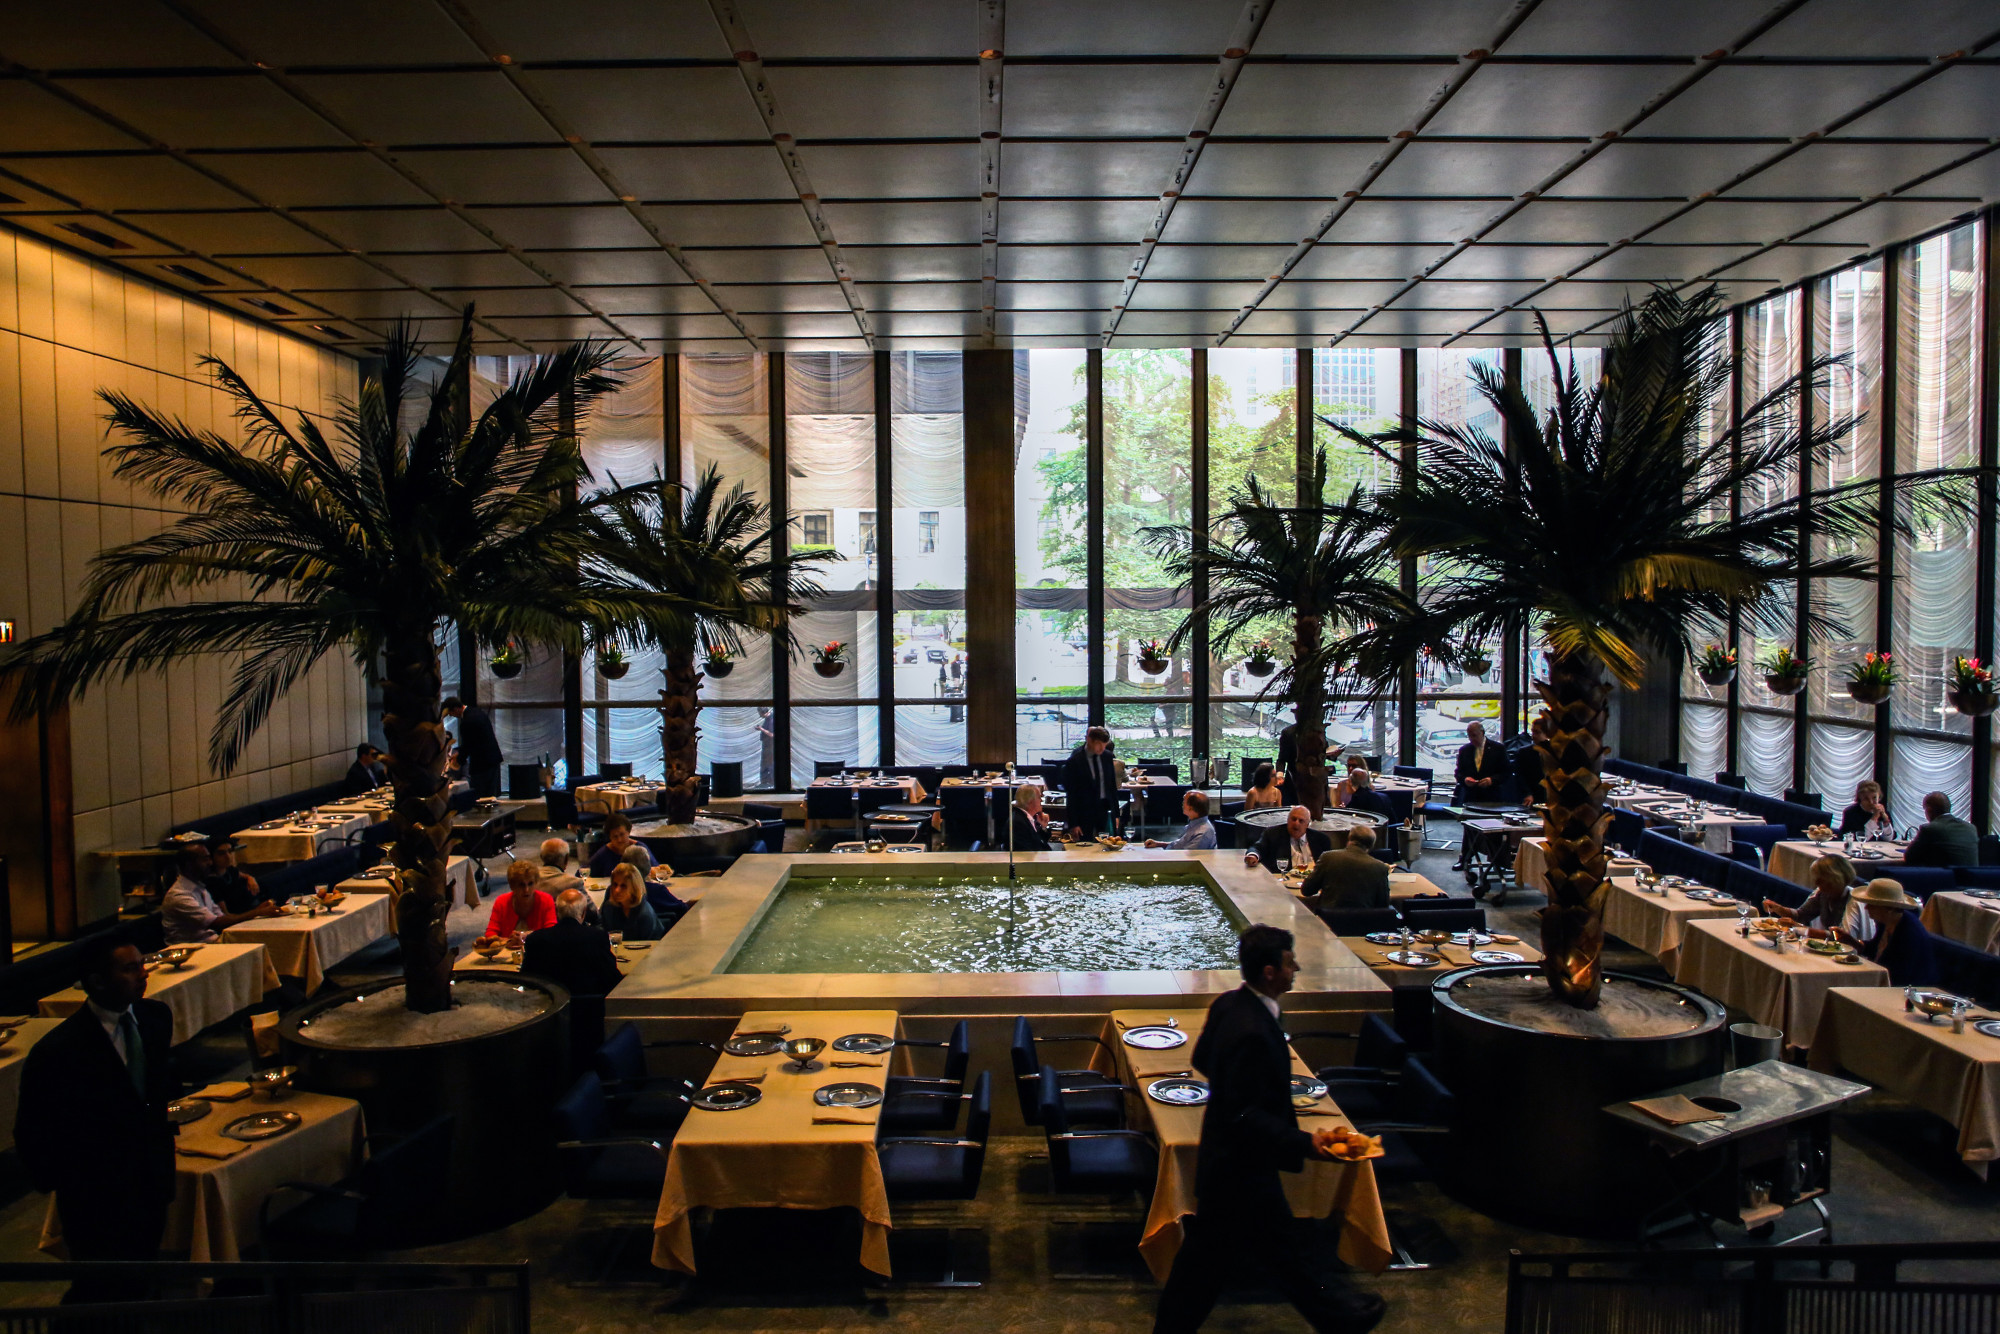 The Four Seasons restaurant at the Seagram Building location in New York in 2016.